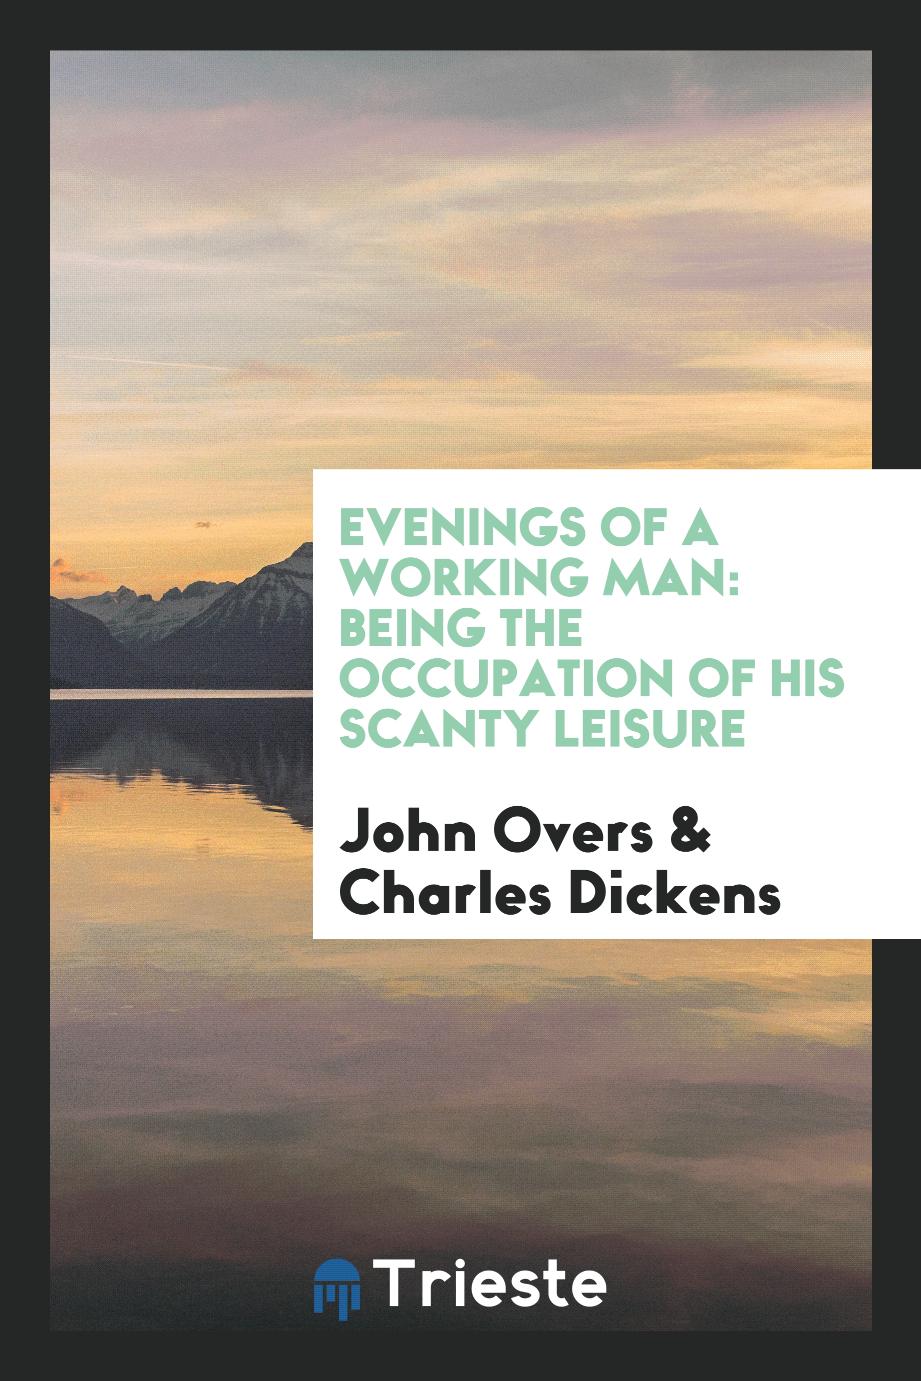 Evenings of a working man: being the occupation of his scanty leisure